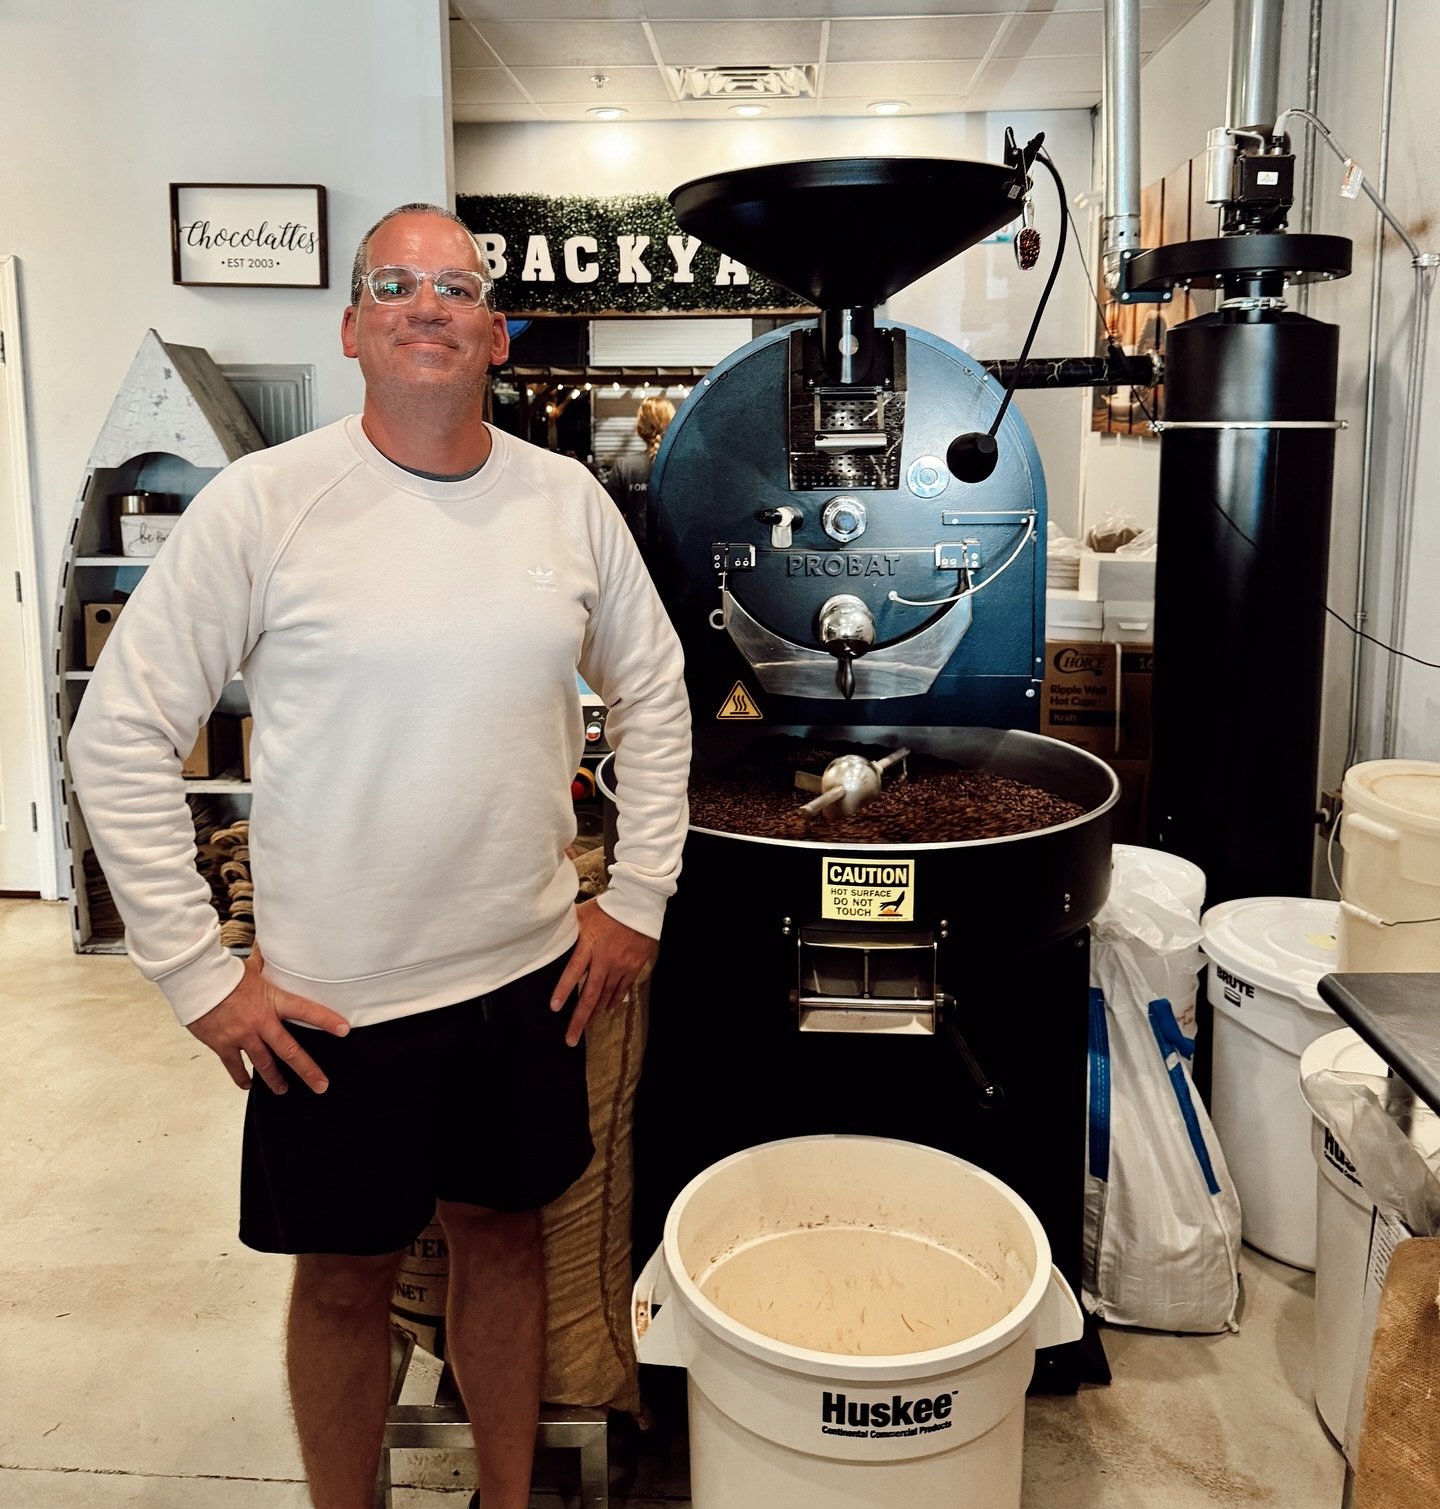 The man, the myth, the legend&hellip; but most importantly the roastmaster! ☕️